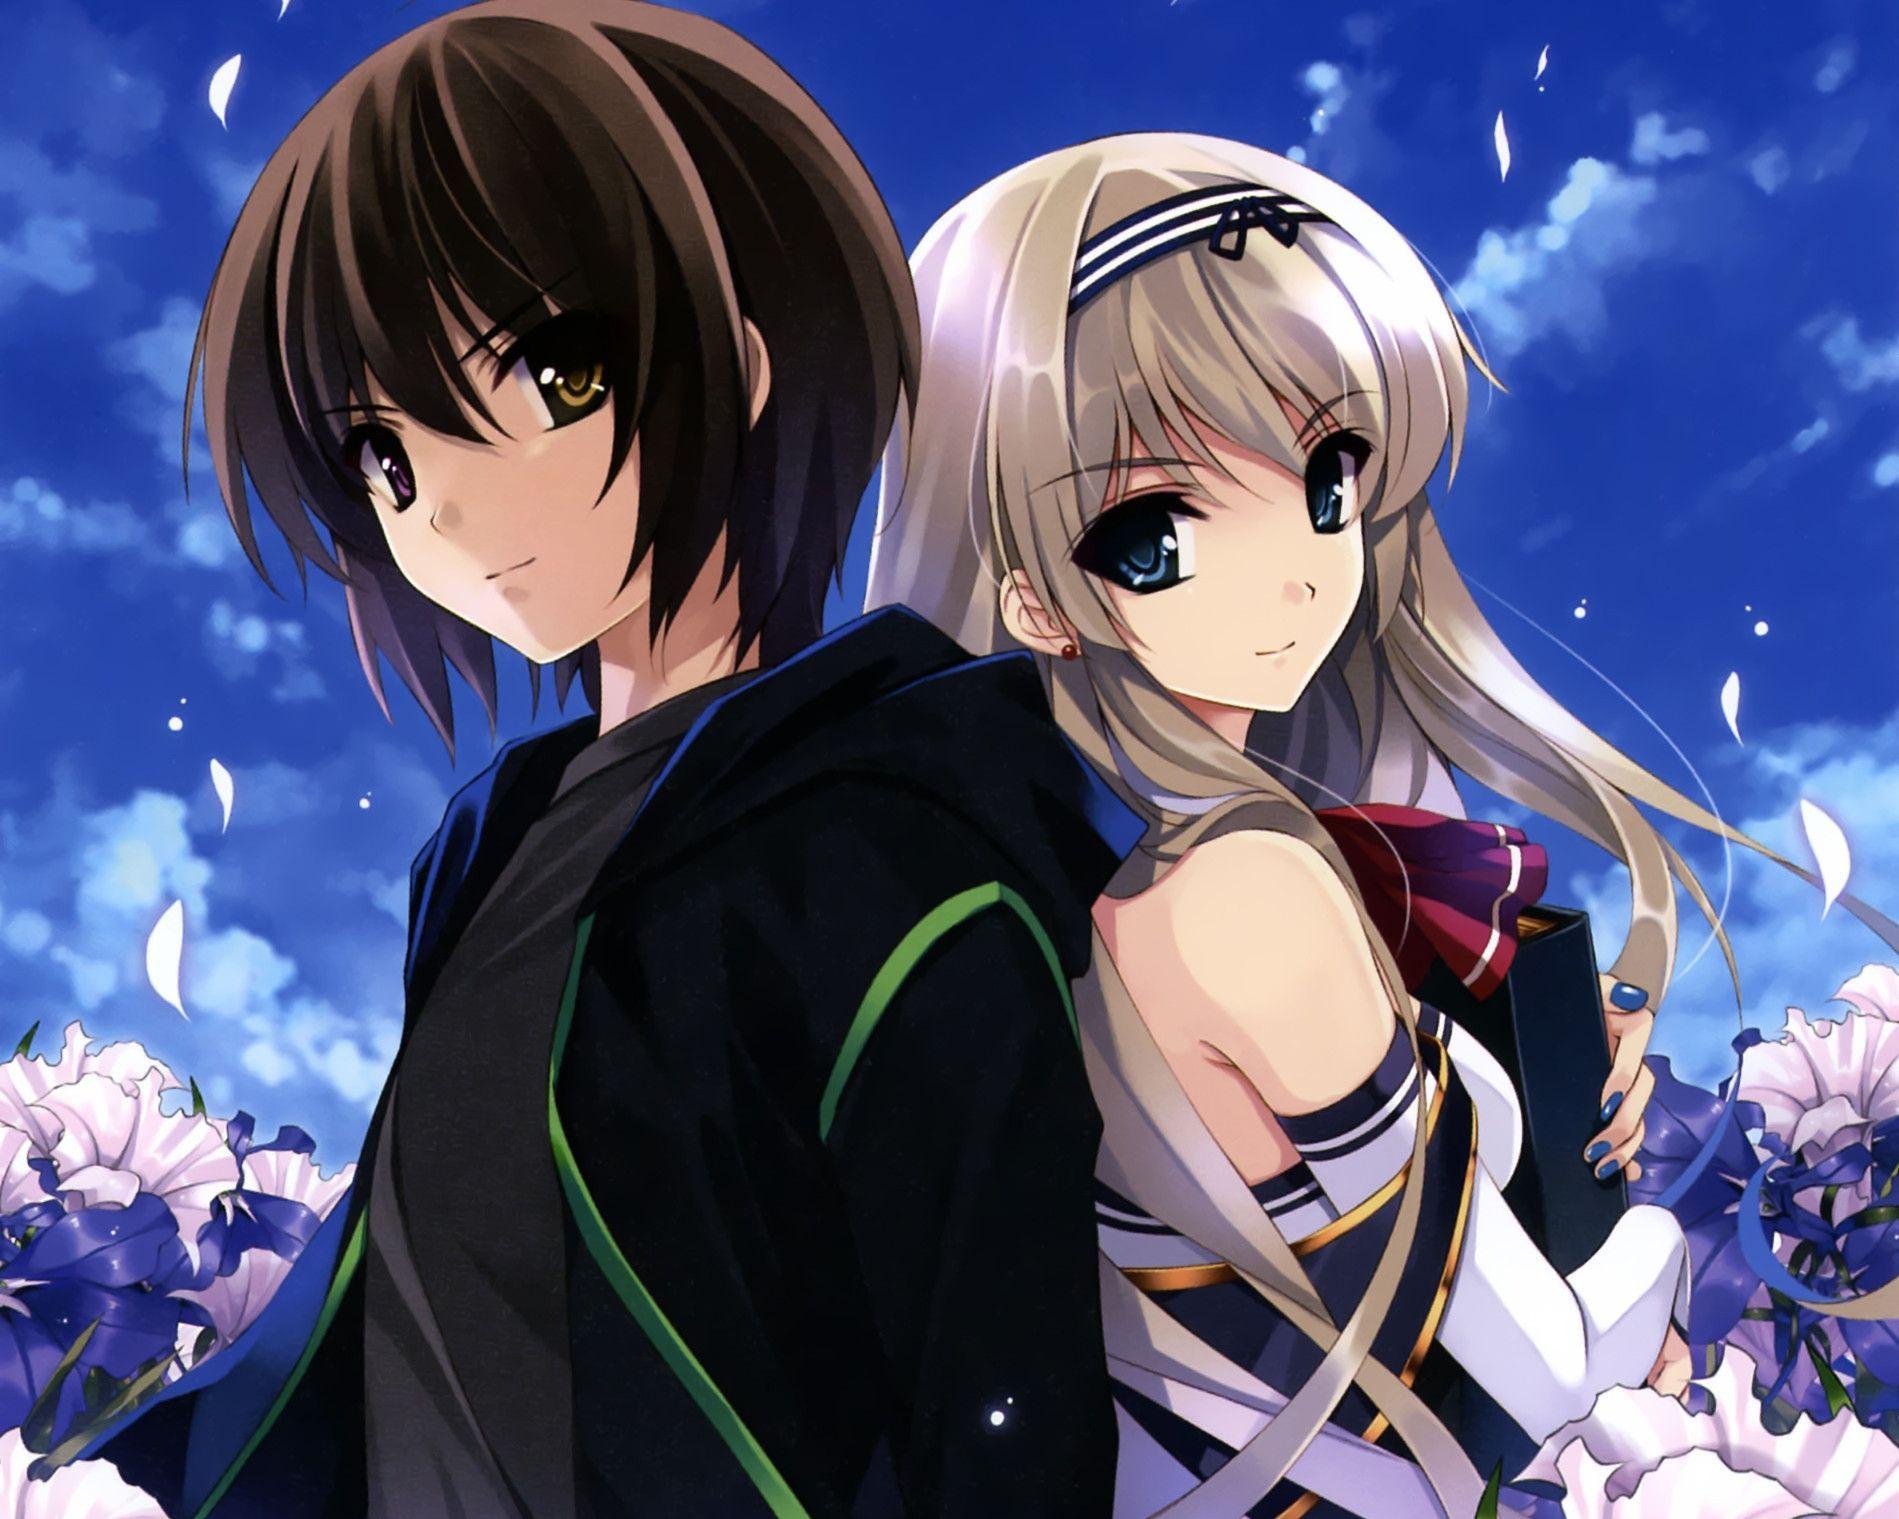 Cute HD Anime Couple DP Wallpapers  Wallpaper Cave